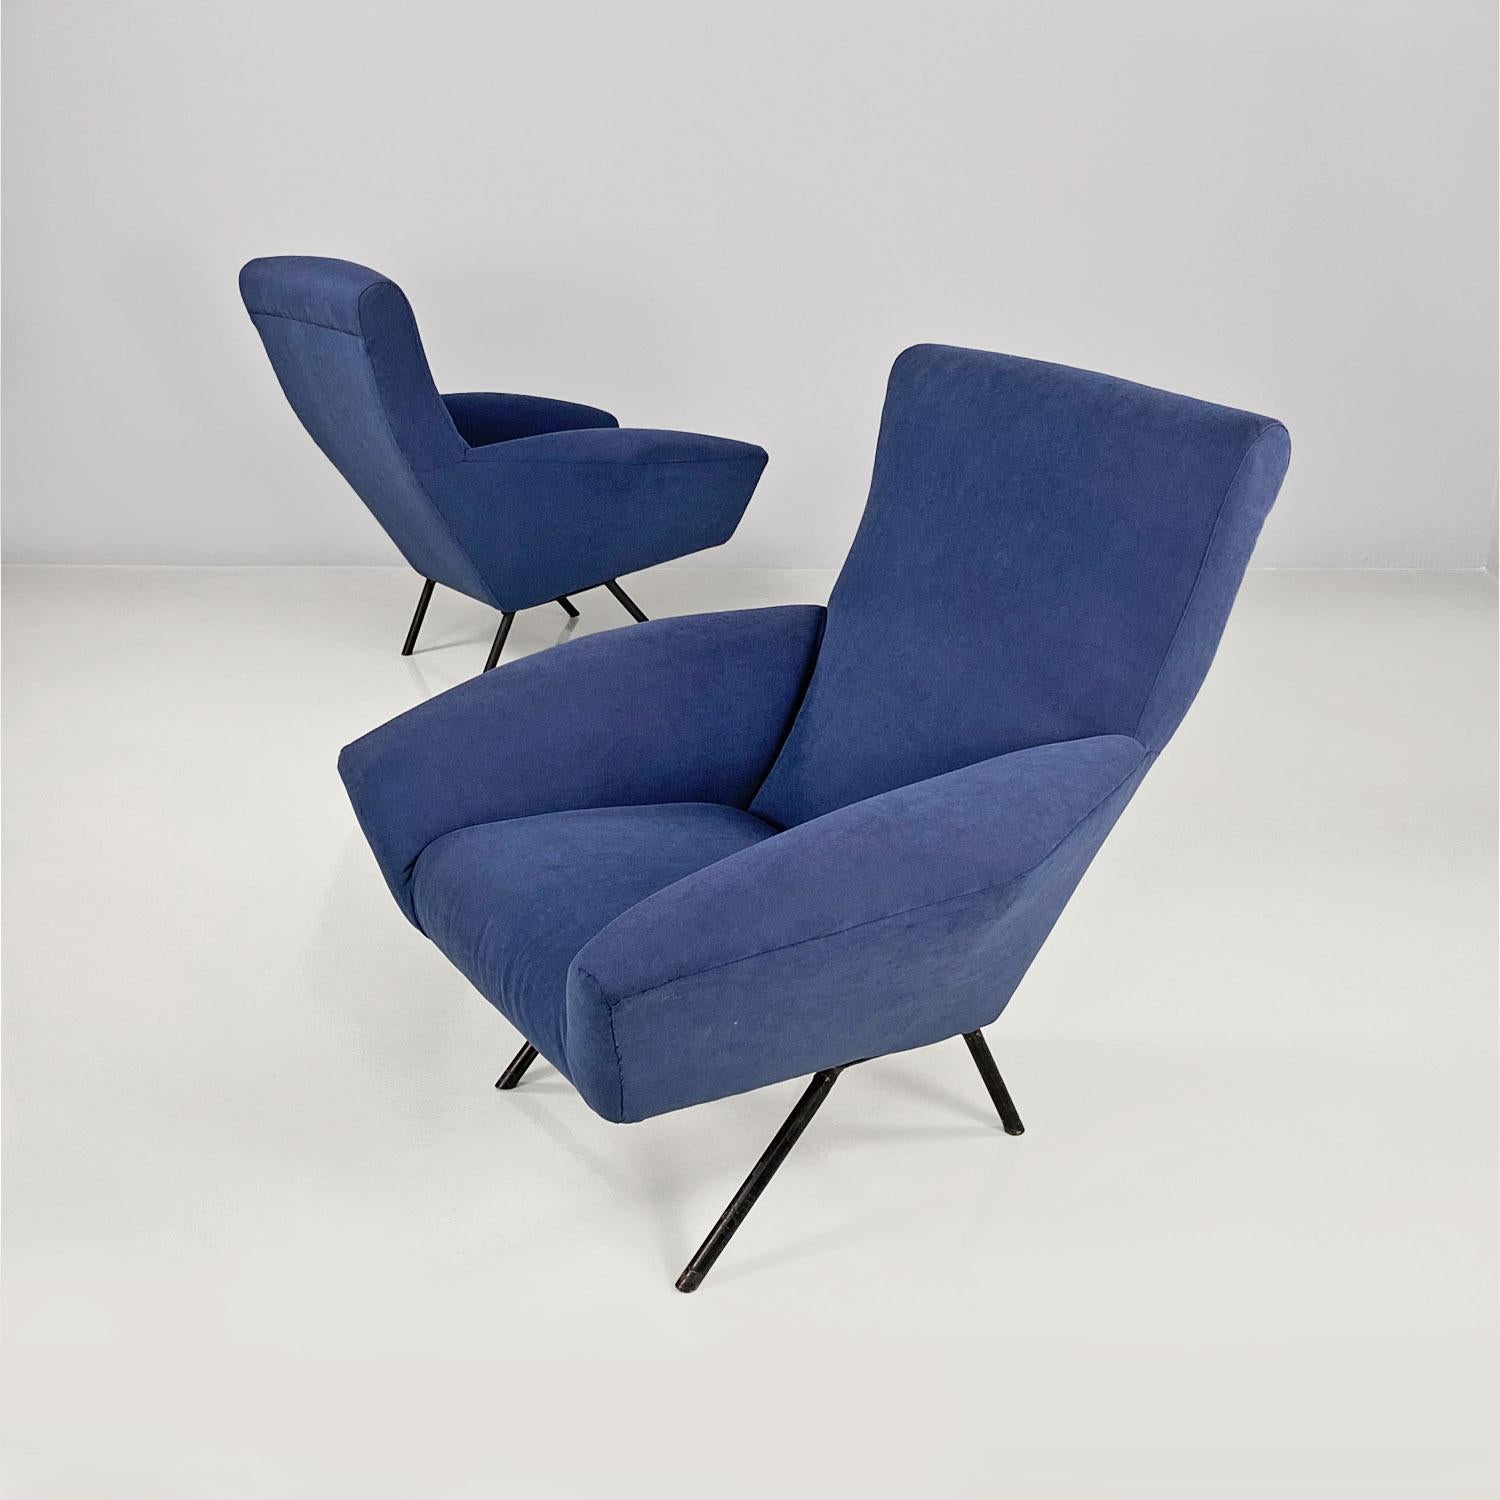 Italian mid-century modern blue fabric and black metal armchairs, 1960s.
Pair of armchairs with tubular structure in black painted metal, with padded seat and backrest covered in blue fabric.
The armrests have an almost trapezoidal shape and tend to